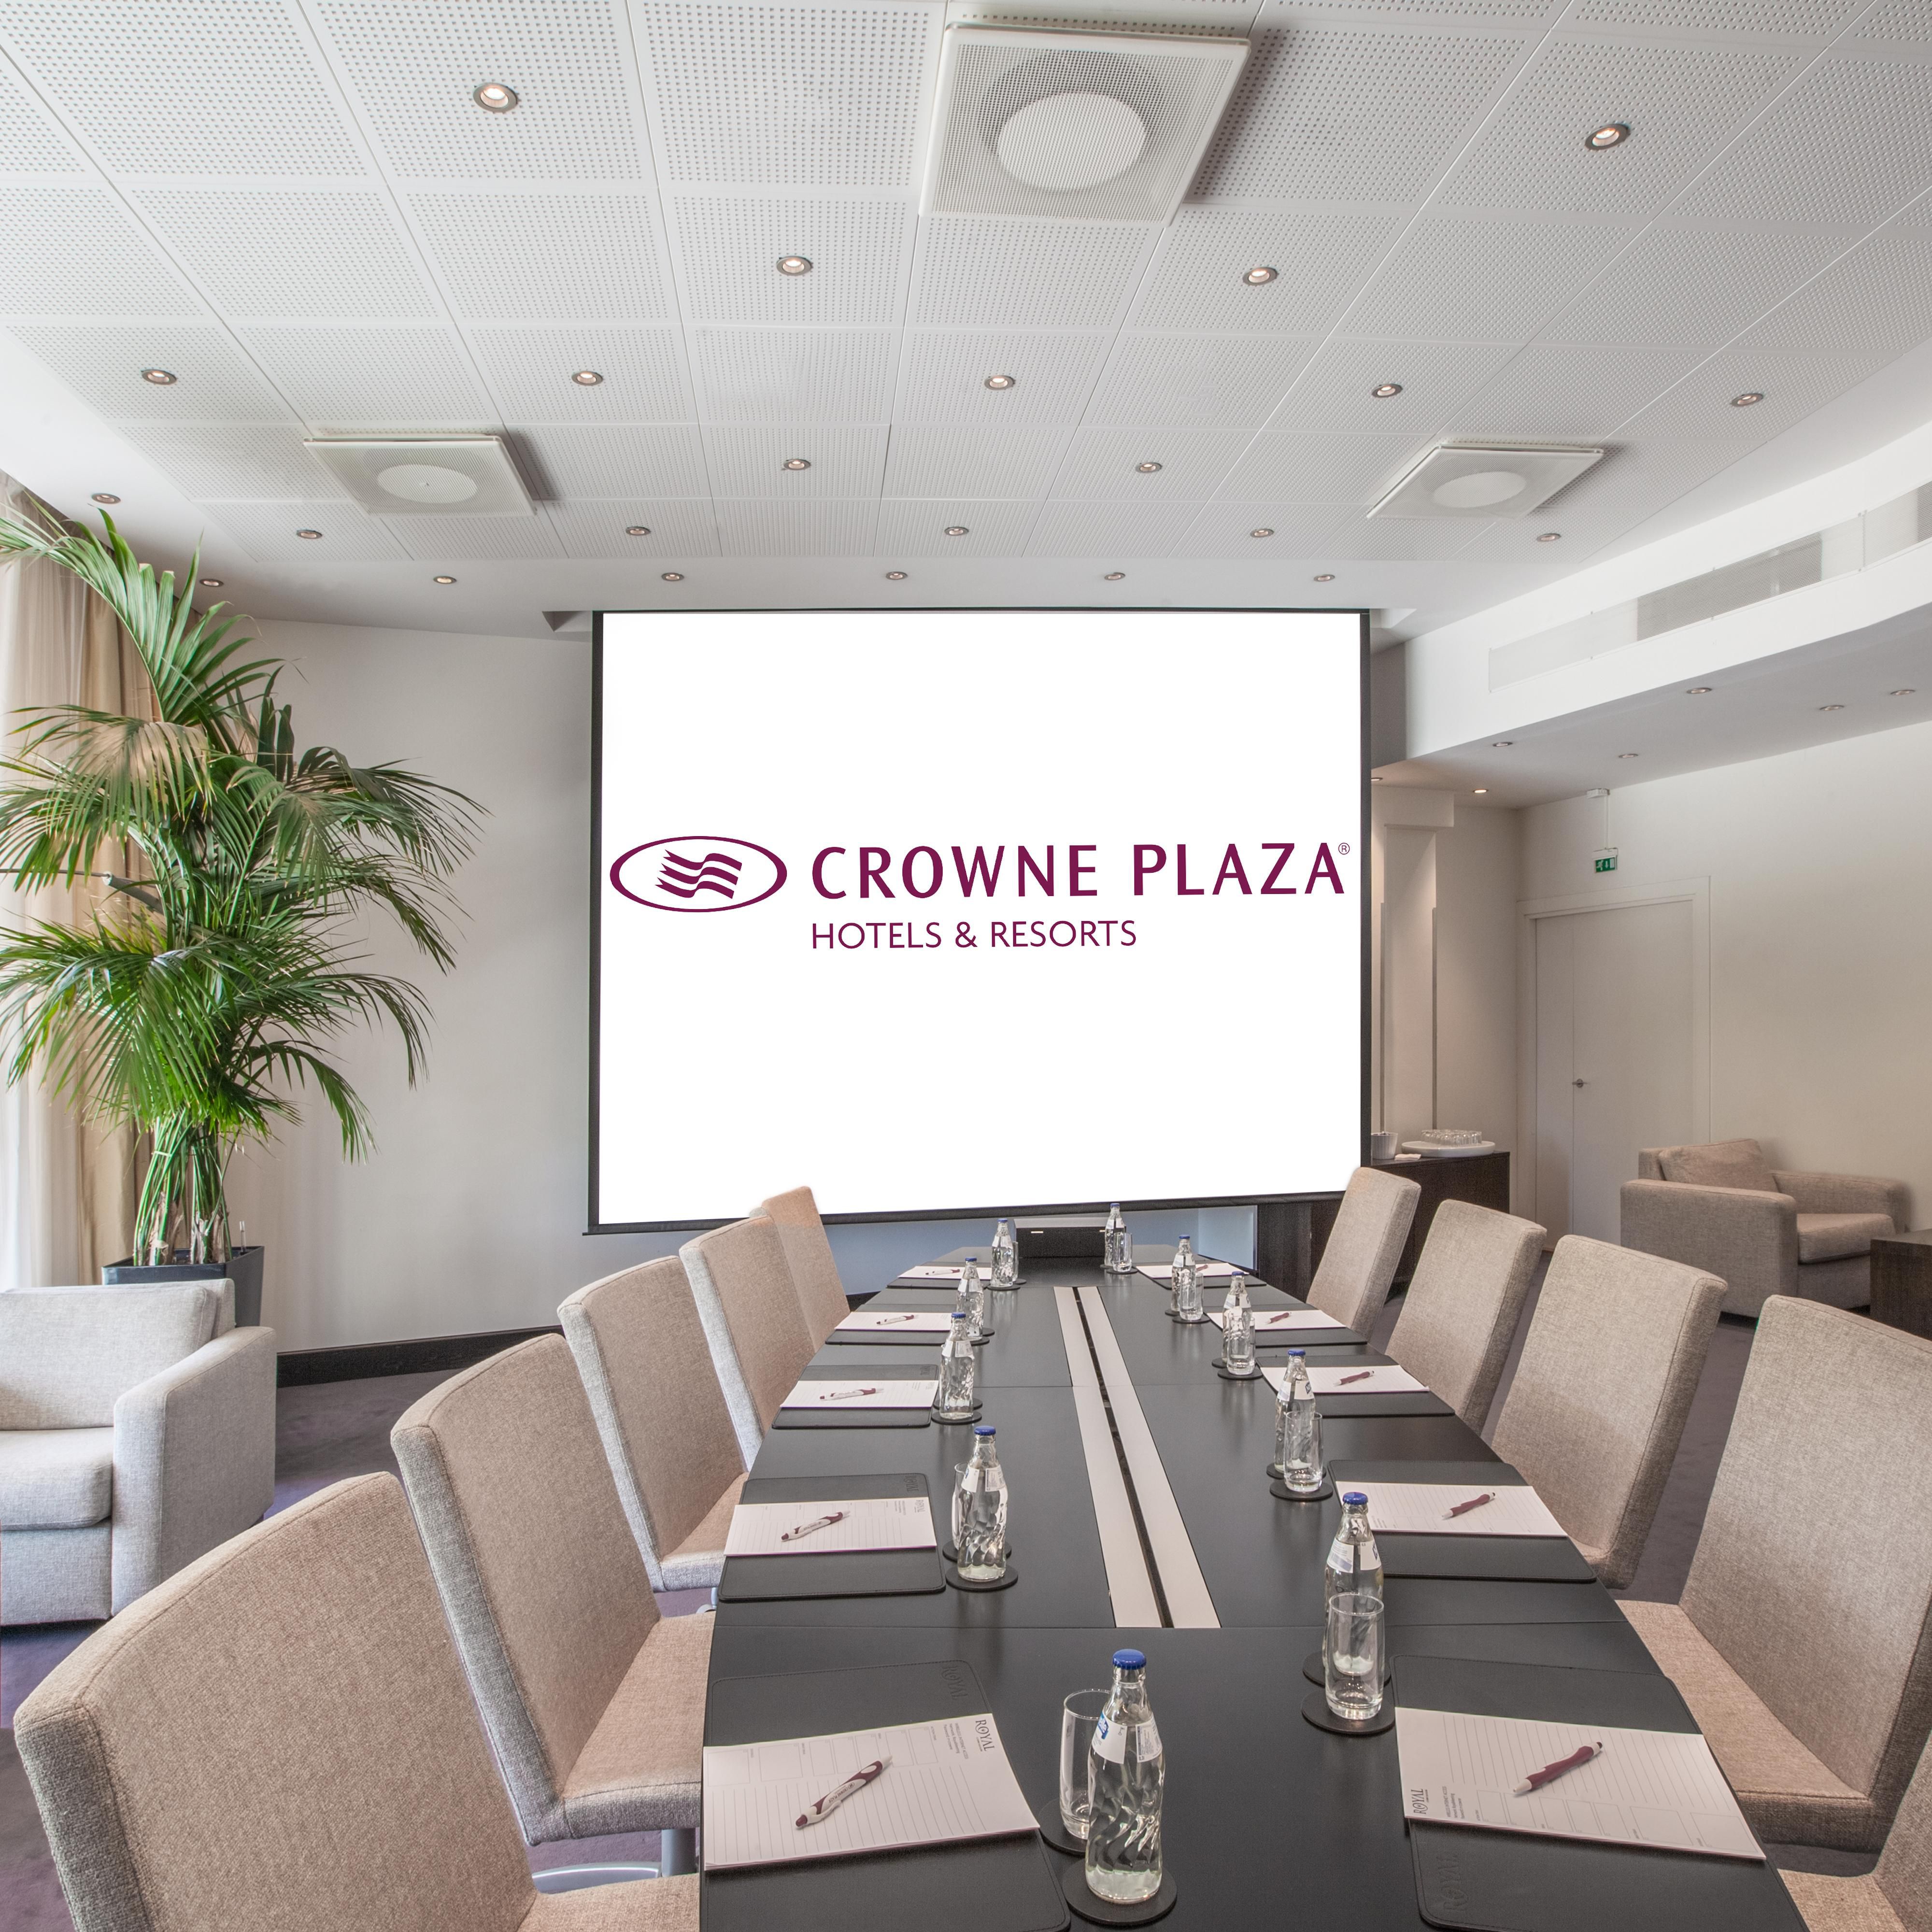 Our stylish Boardroom is perfect meeting room up to 12 people